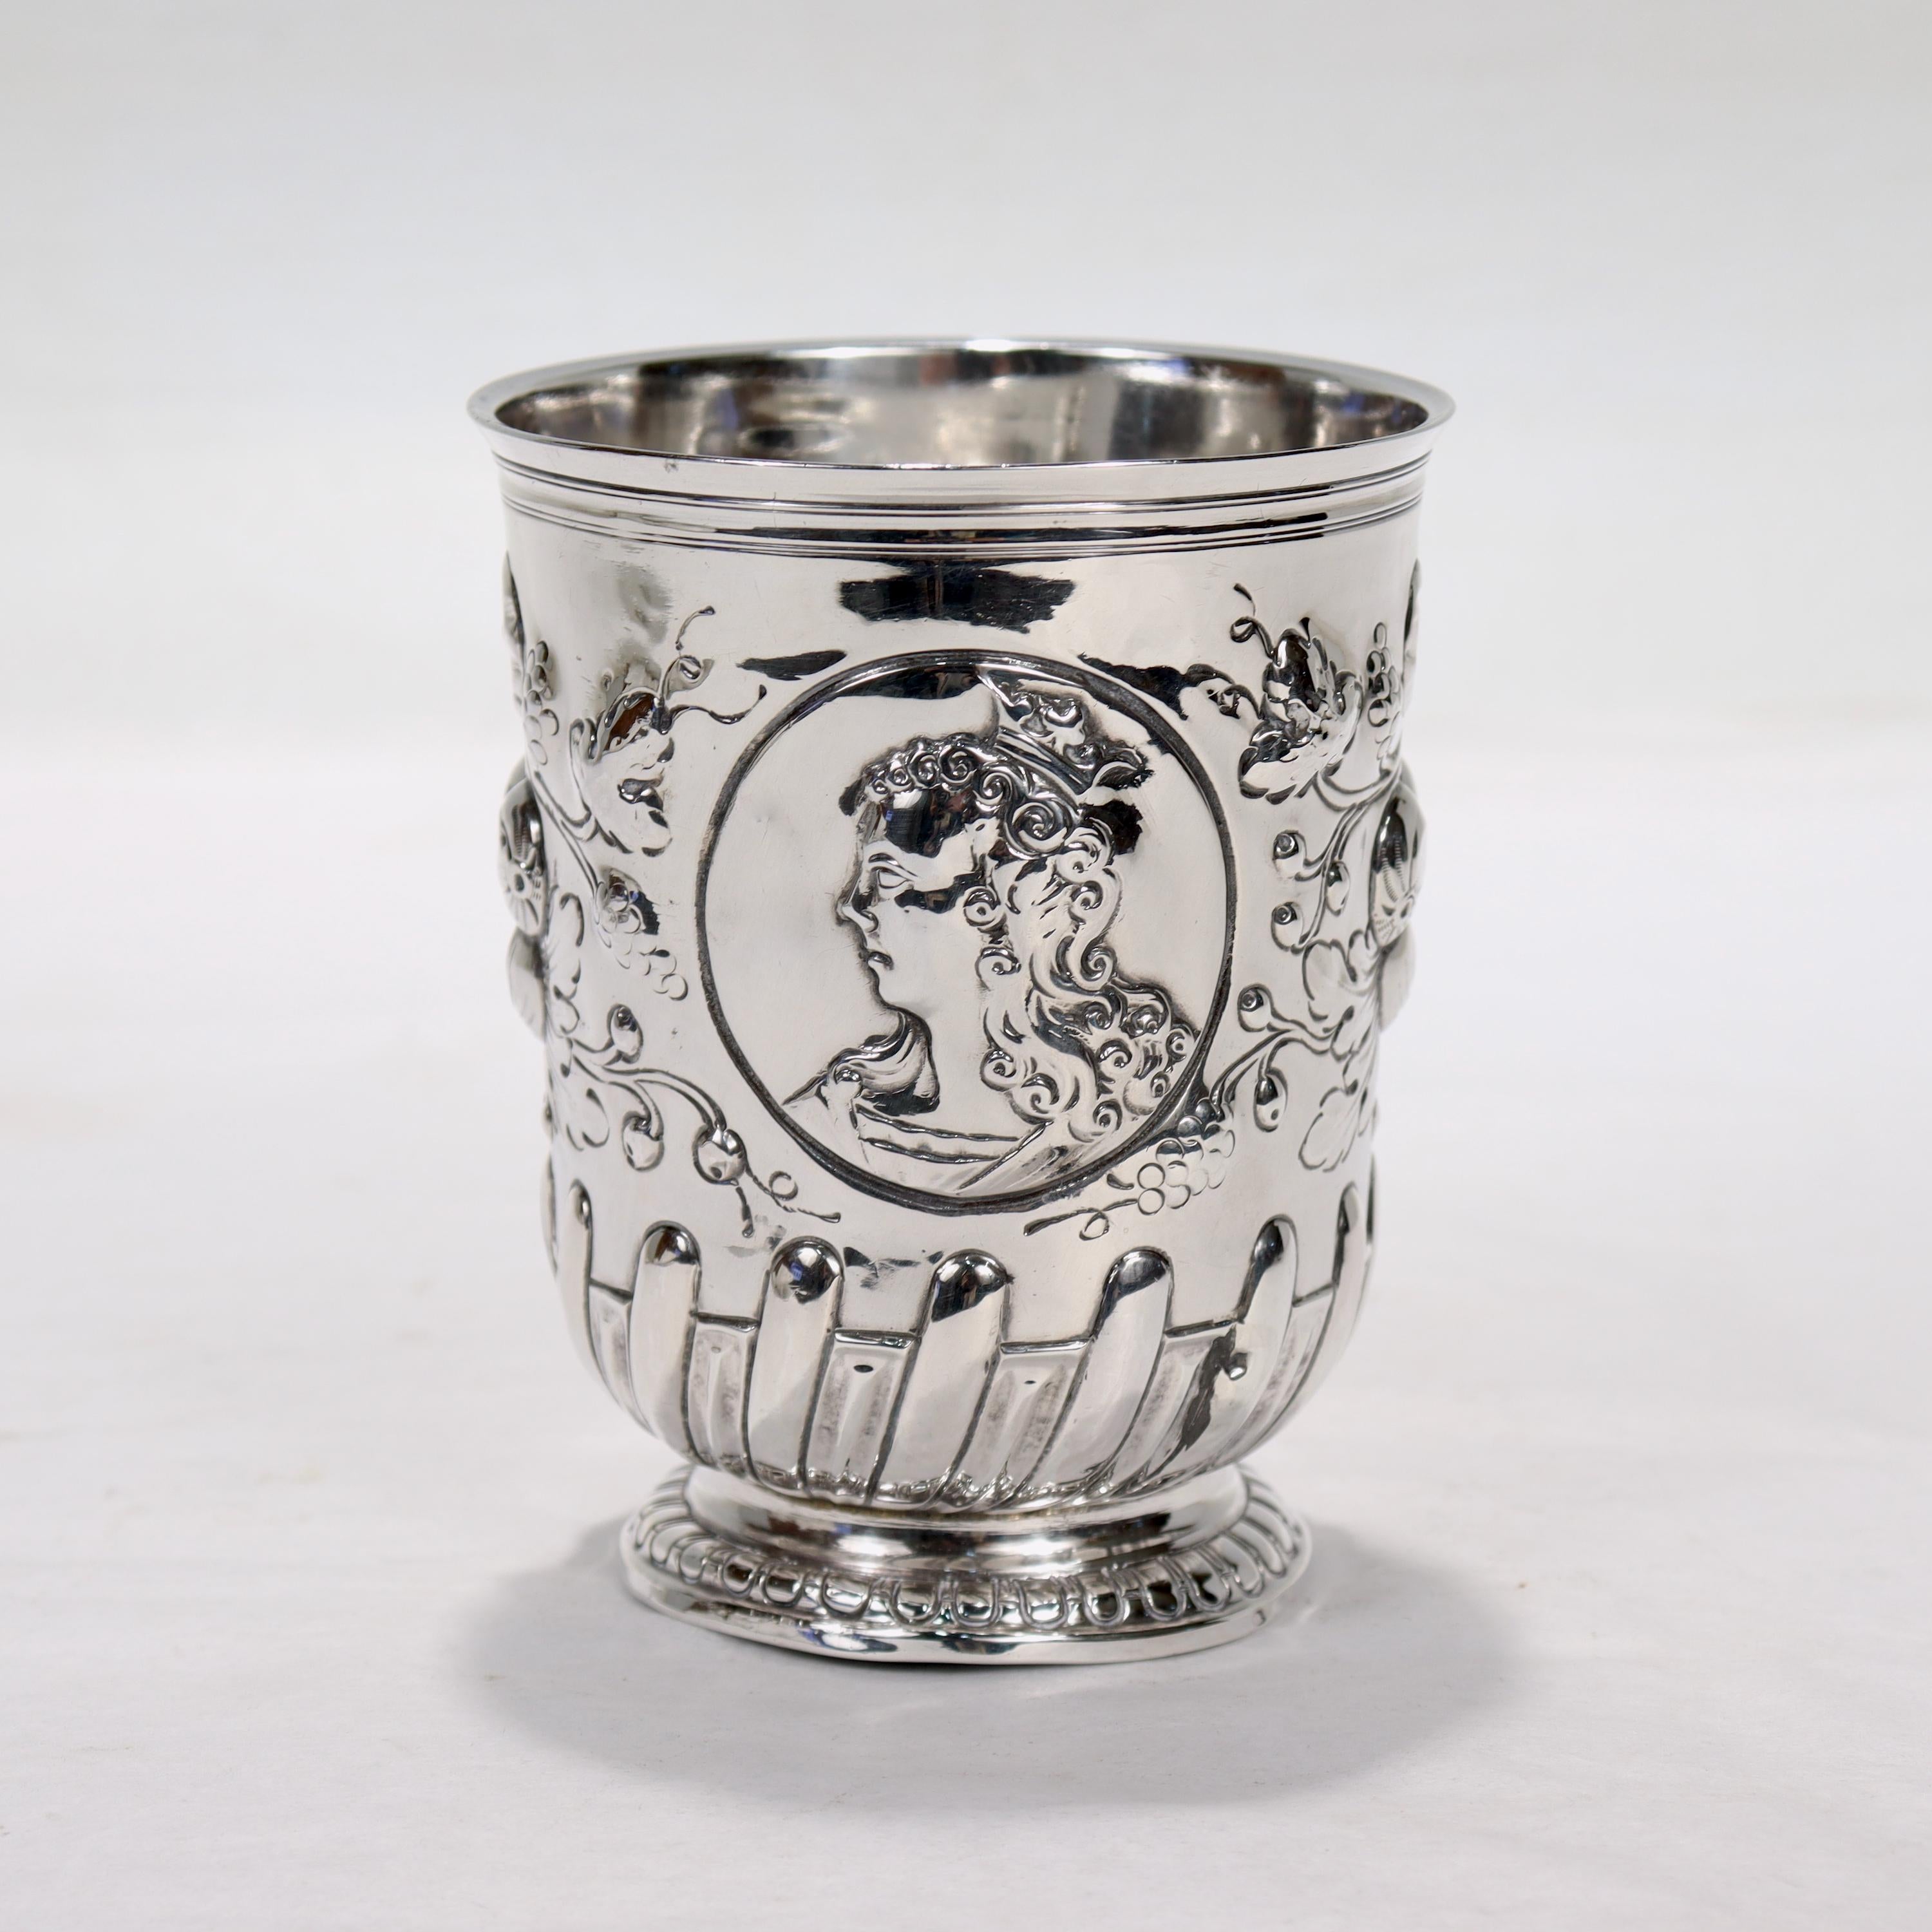 A fine antique sterling silver beaker or cup.

With a stepped rim, profiles of a man and a woman front and verso (possibly a king and queen), and repoussé decoration throughout with fruit and foliage above gadrooning and a thin plugger formed